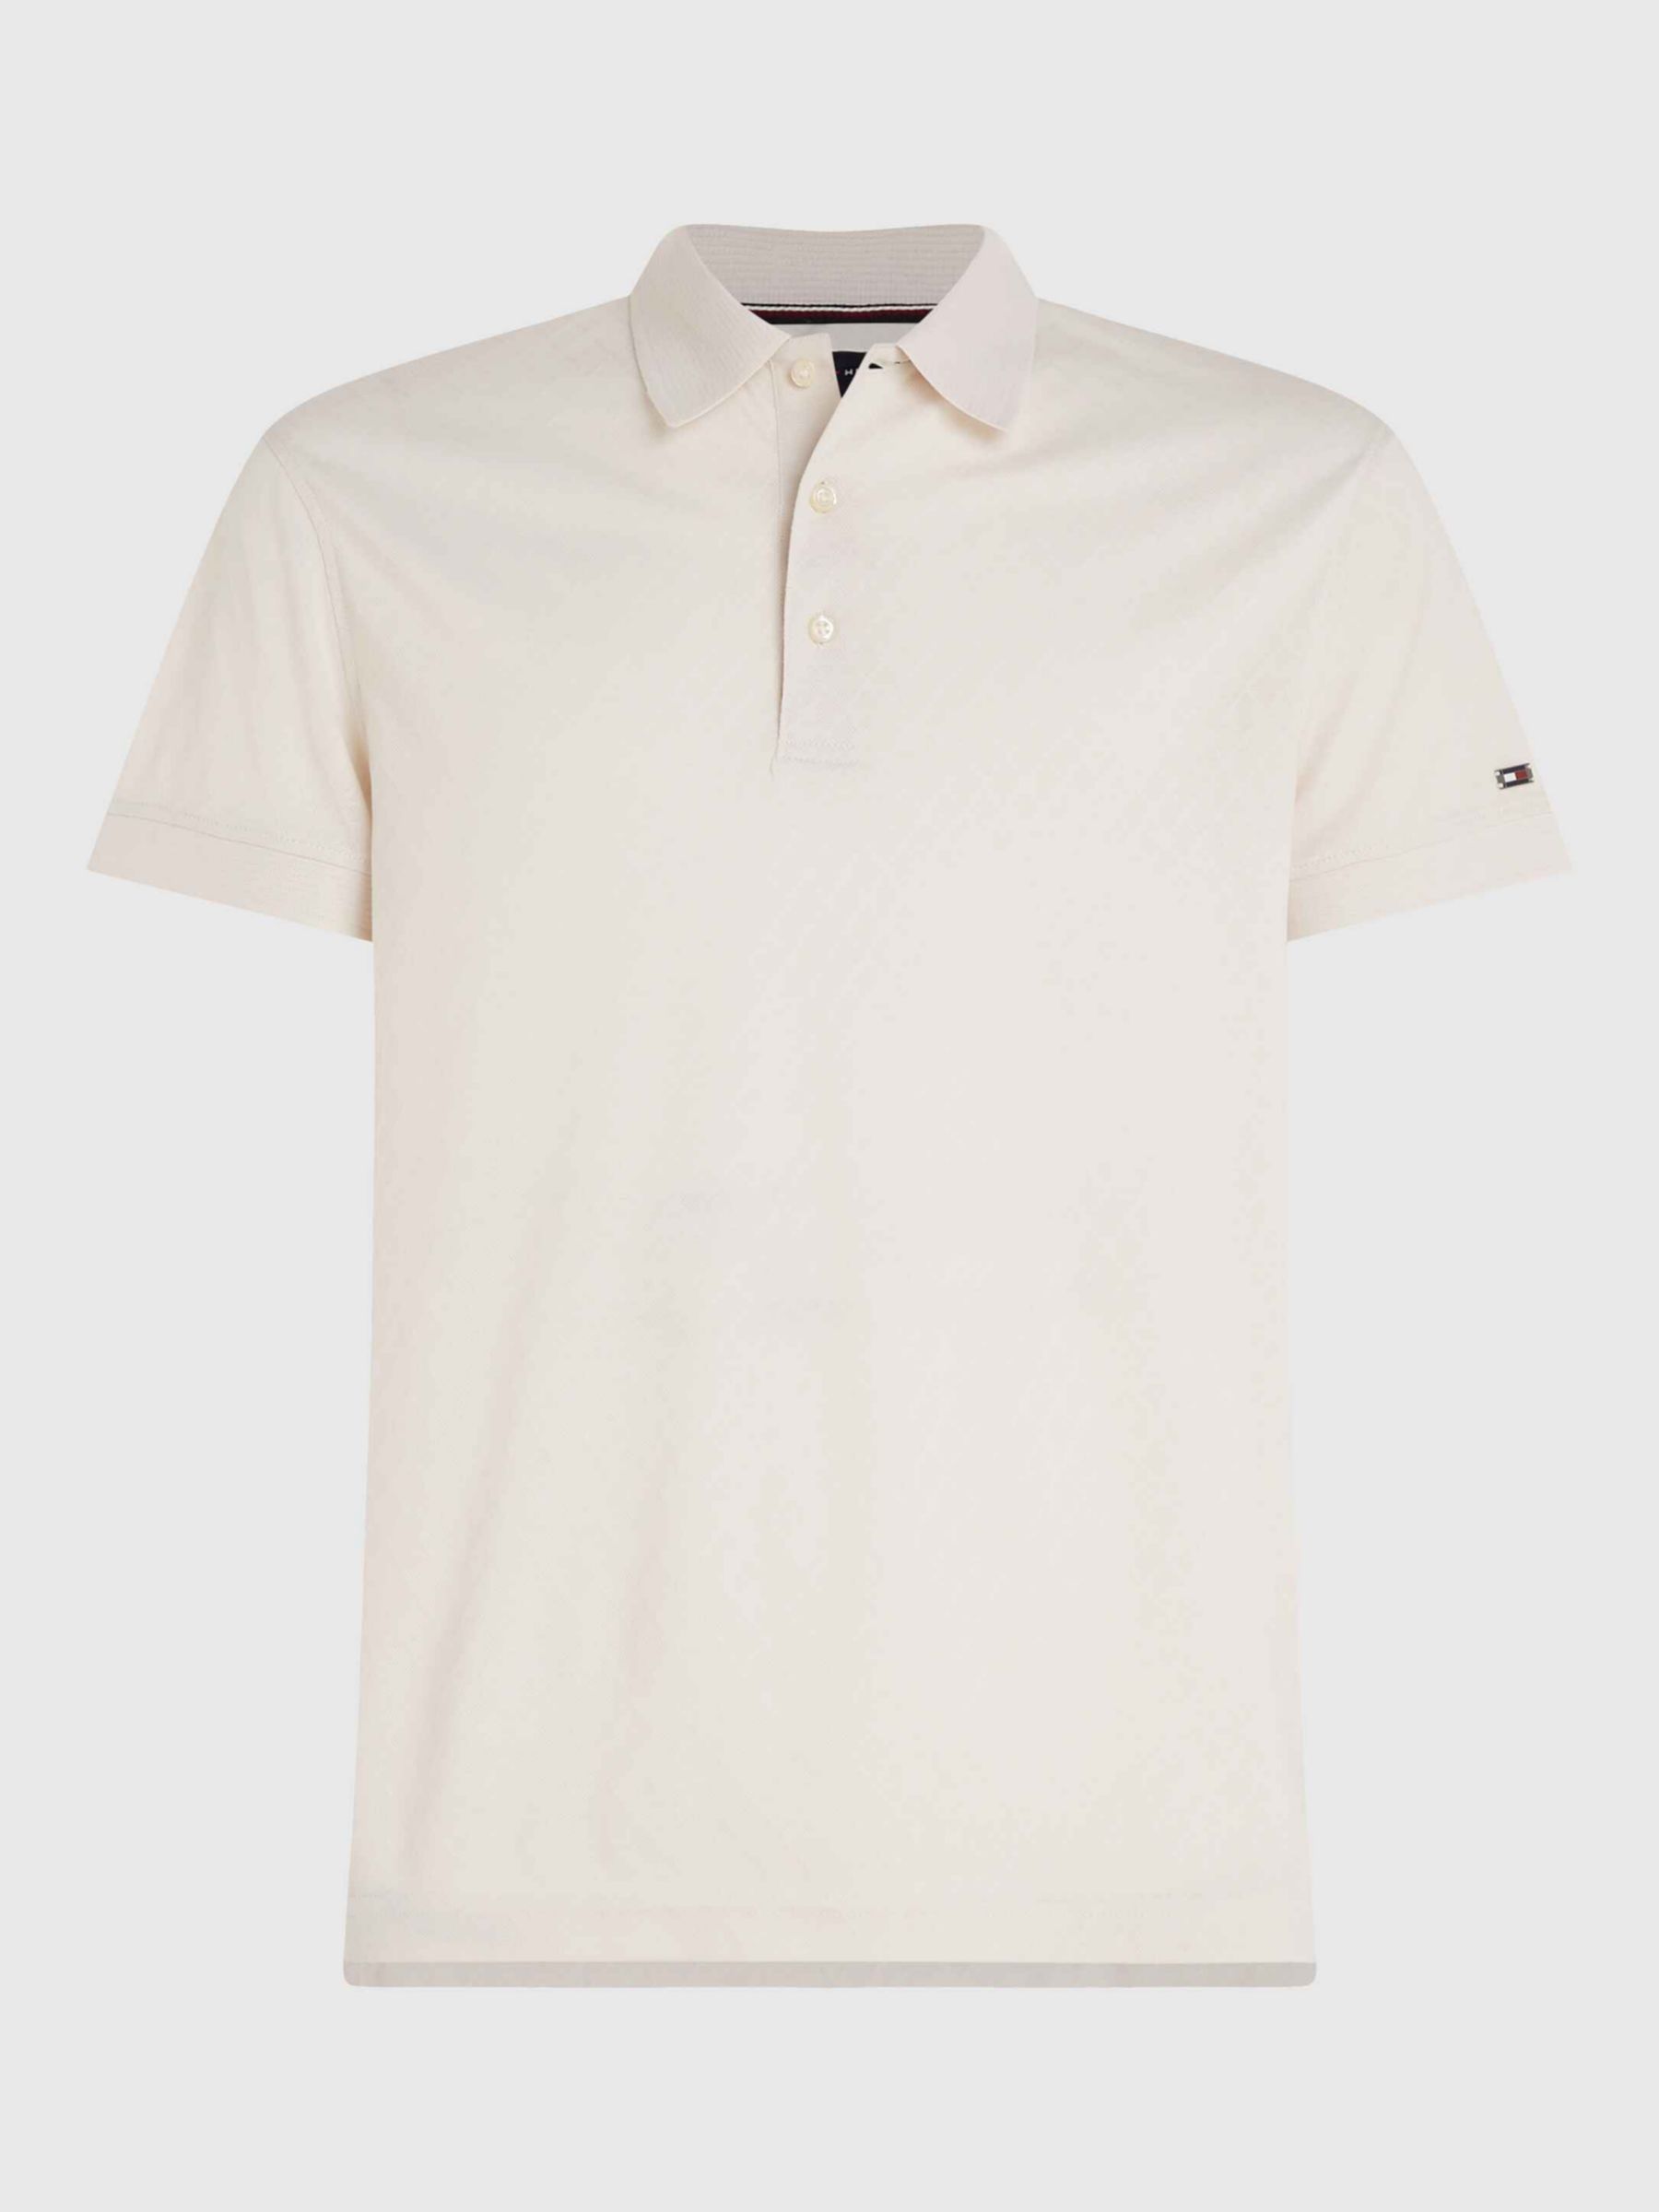 Tommy Hilfiger Tonal Structure Slim Polo Top, Weathered White, L